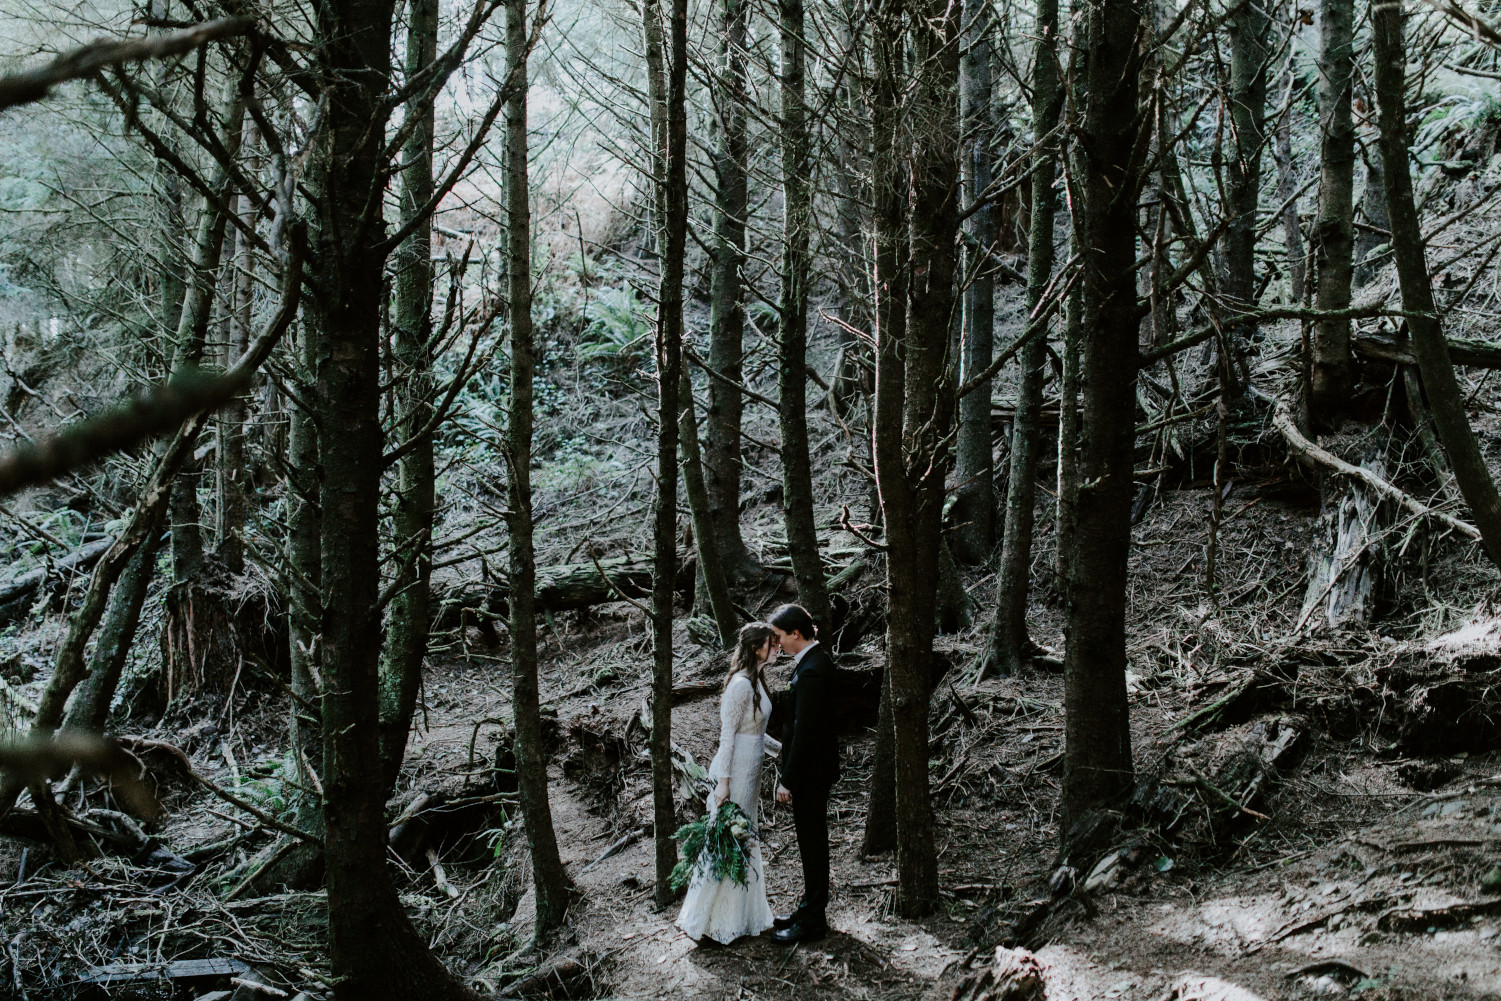 Nicole rests her head on Vlad in the forest near Cannon Beach. Elopement wedding photography at Cannon Beach by Sienna Plus Josh.